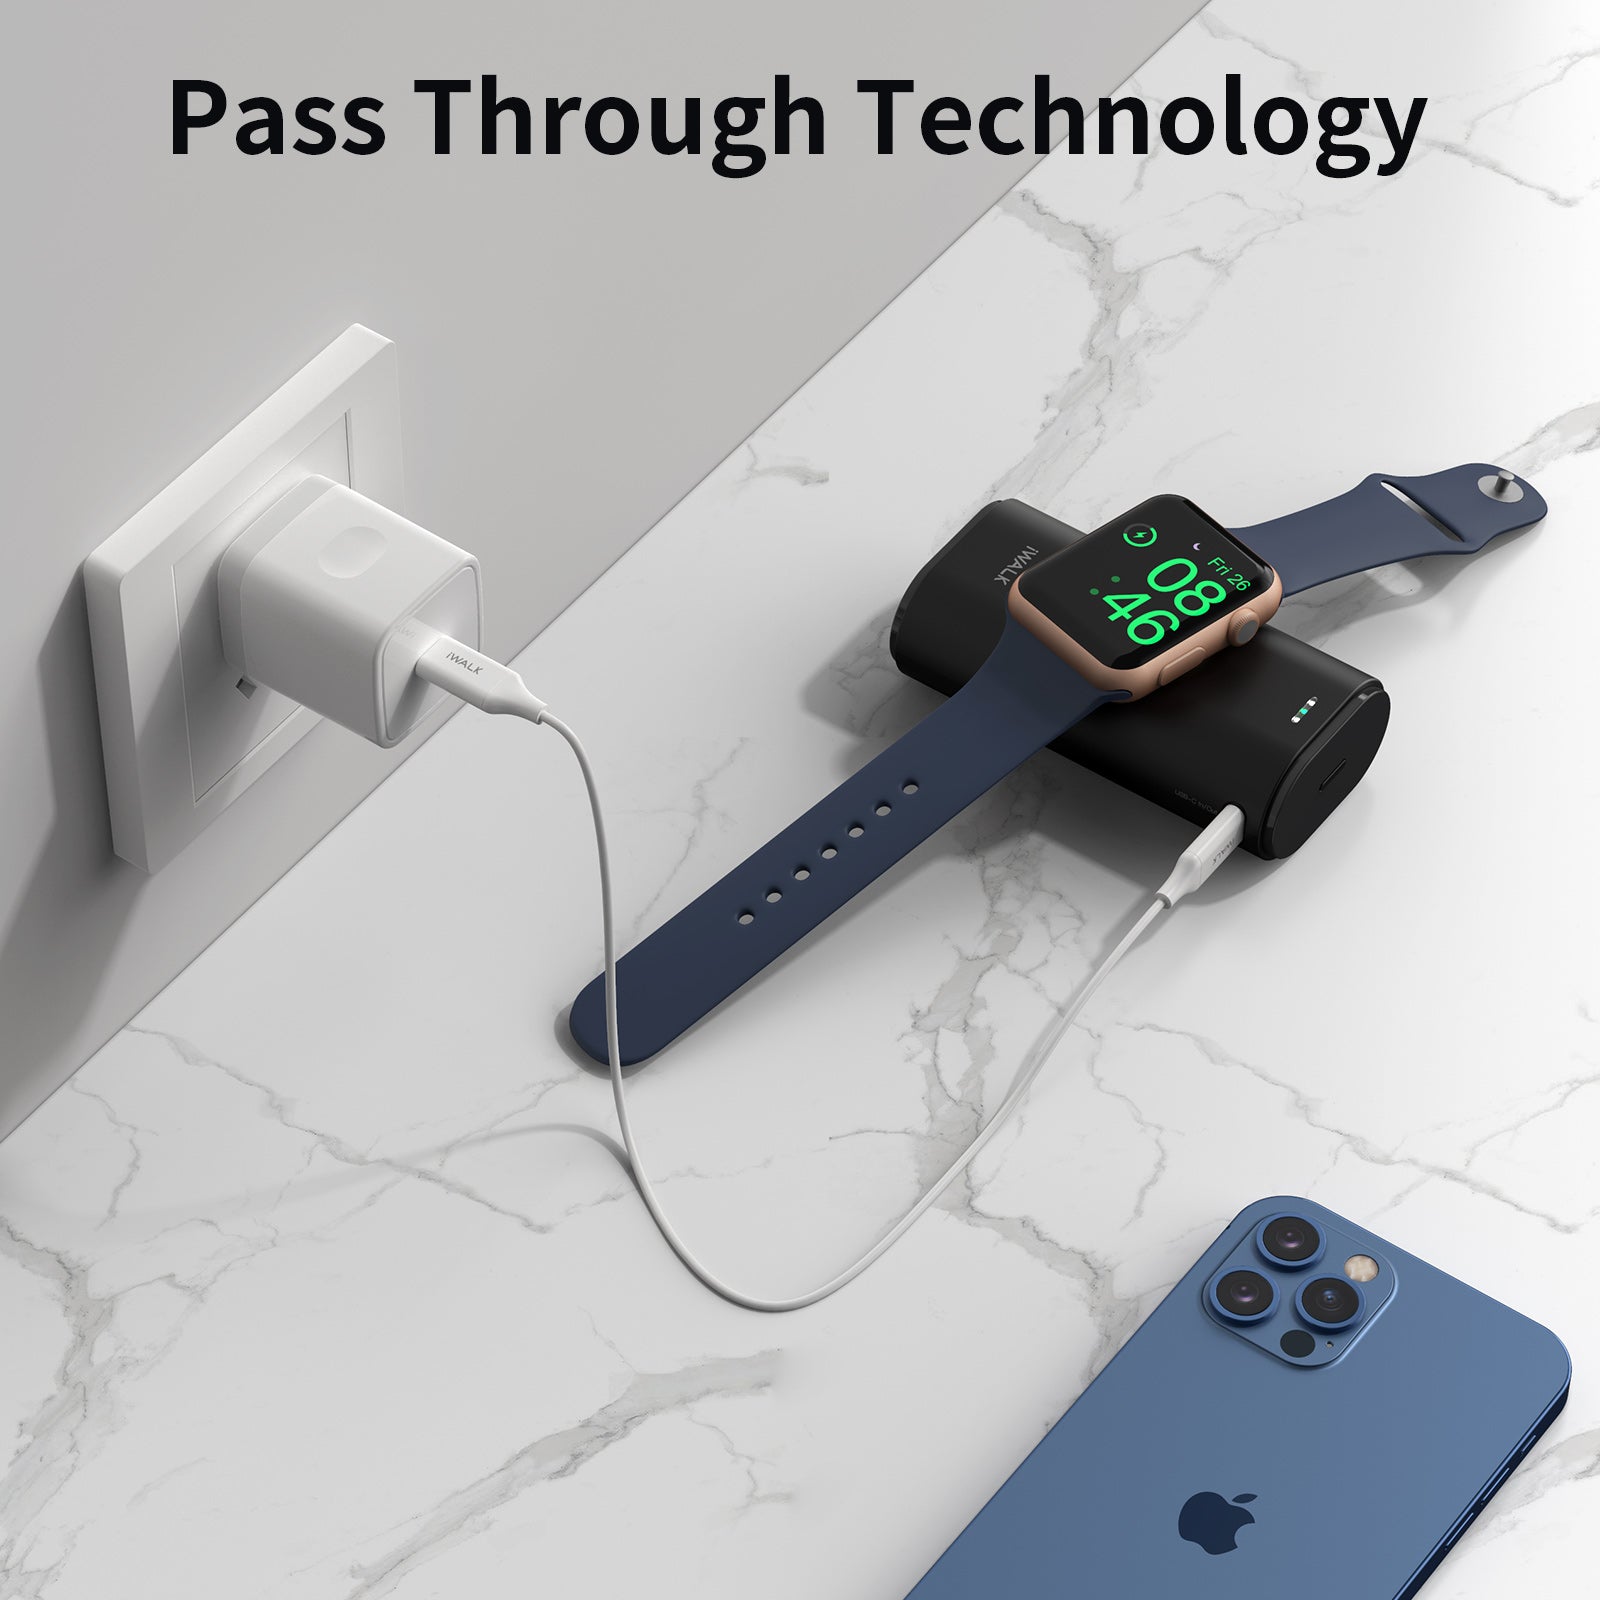 portable apple watch and phone charger pass throughportable apple watch and phone charger